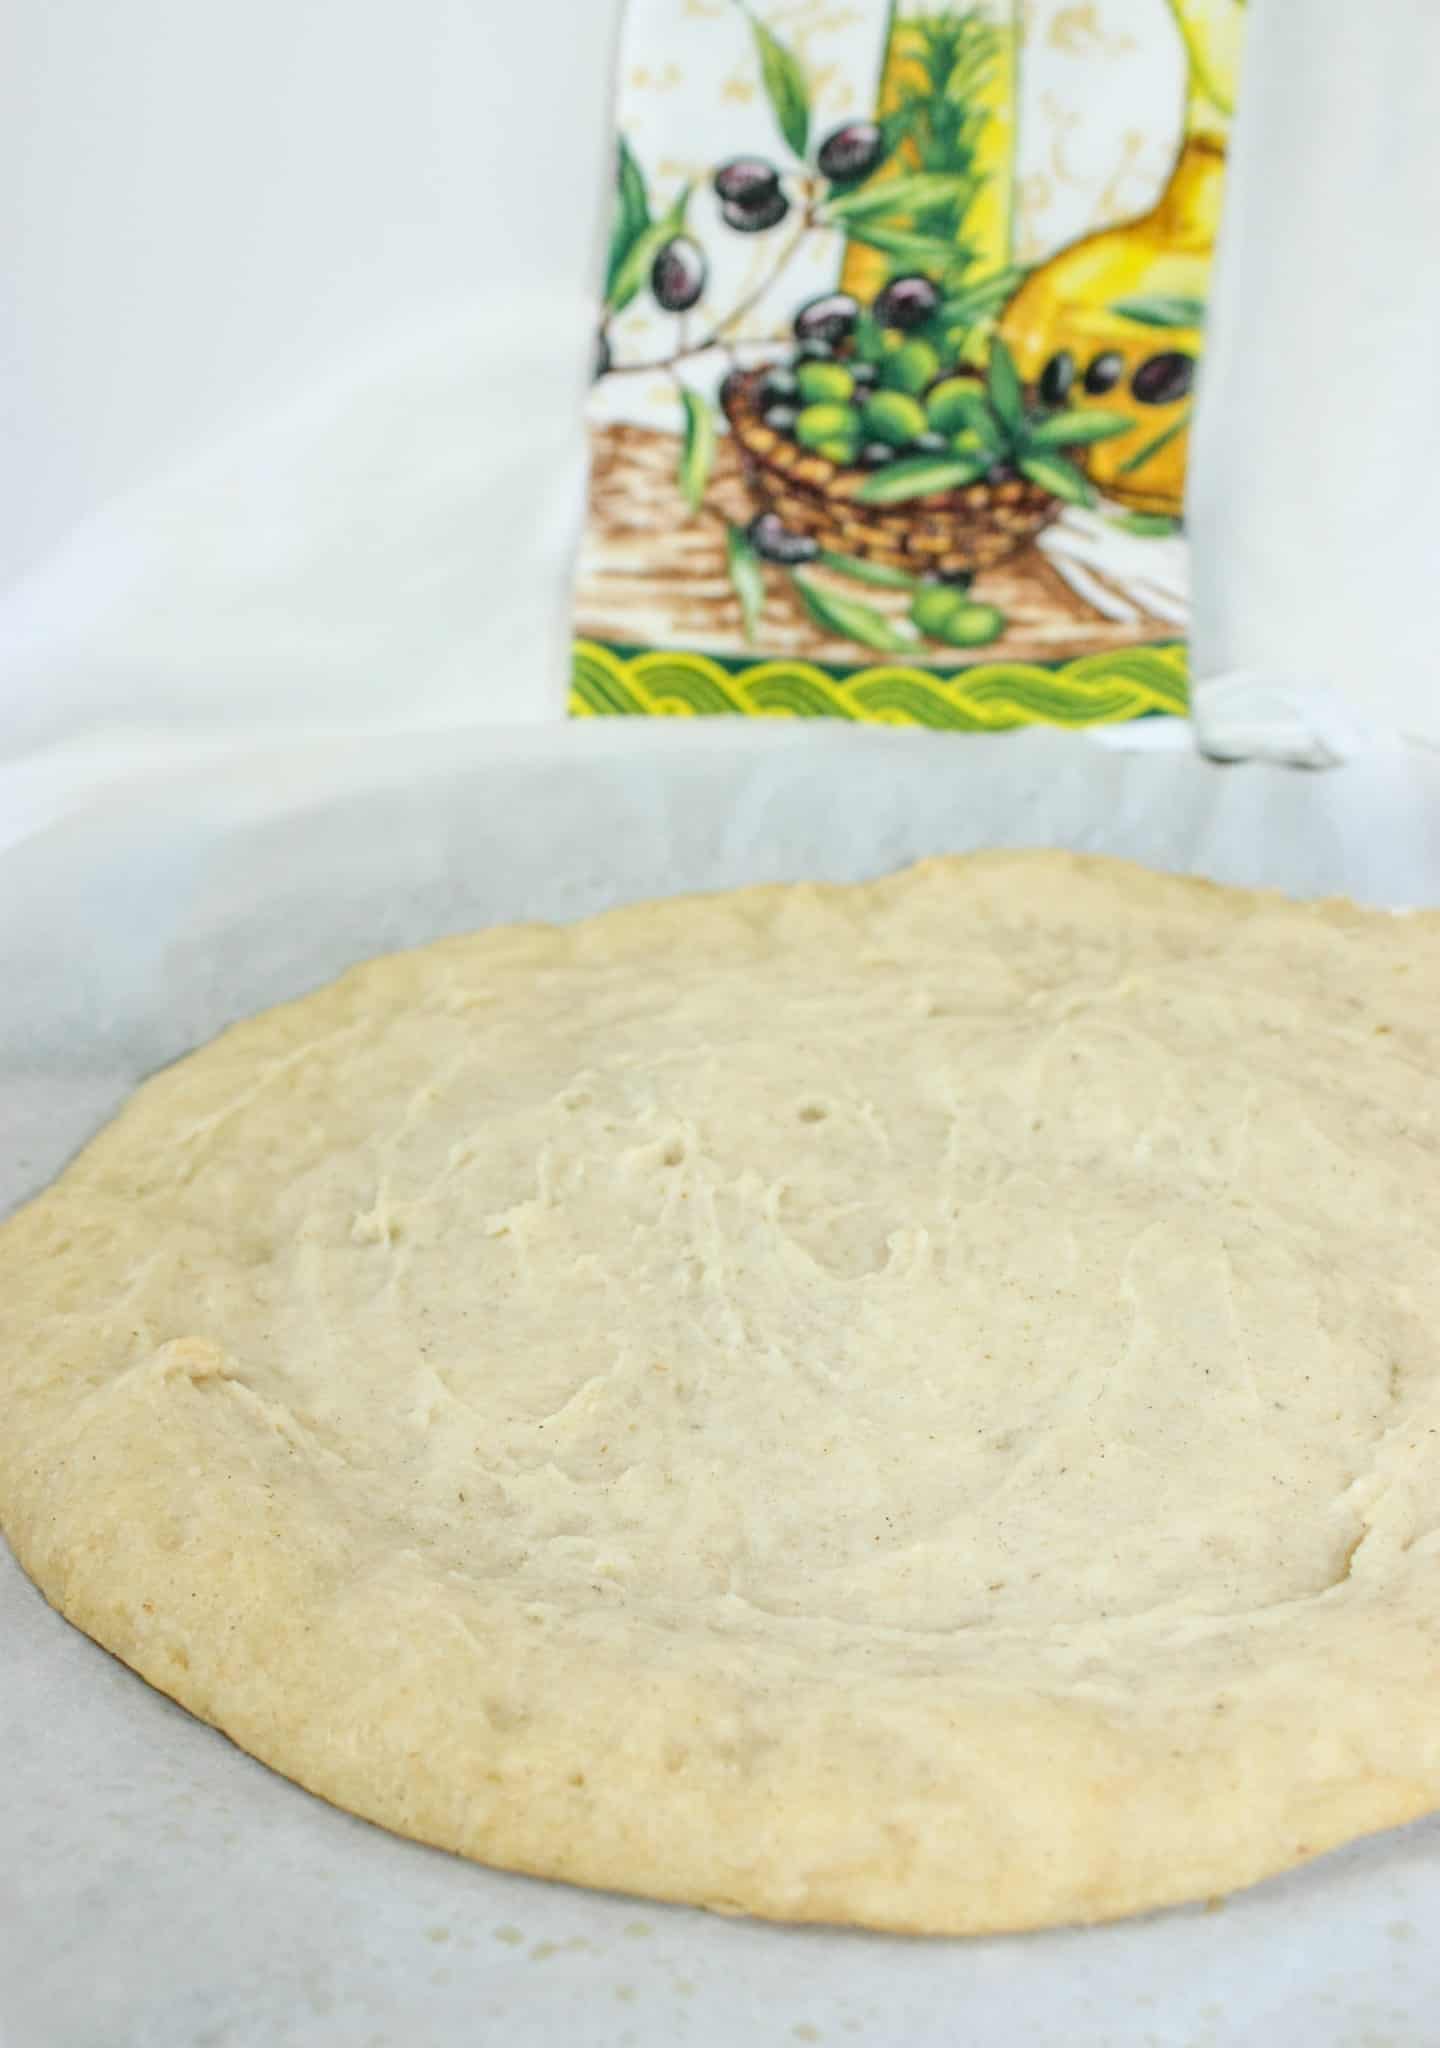 The parbaked pizza dough.